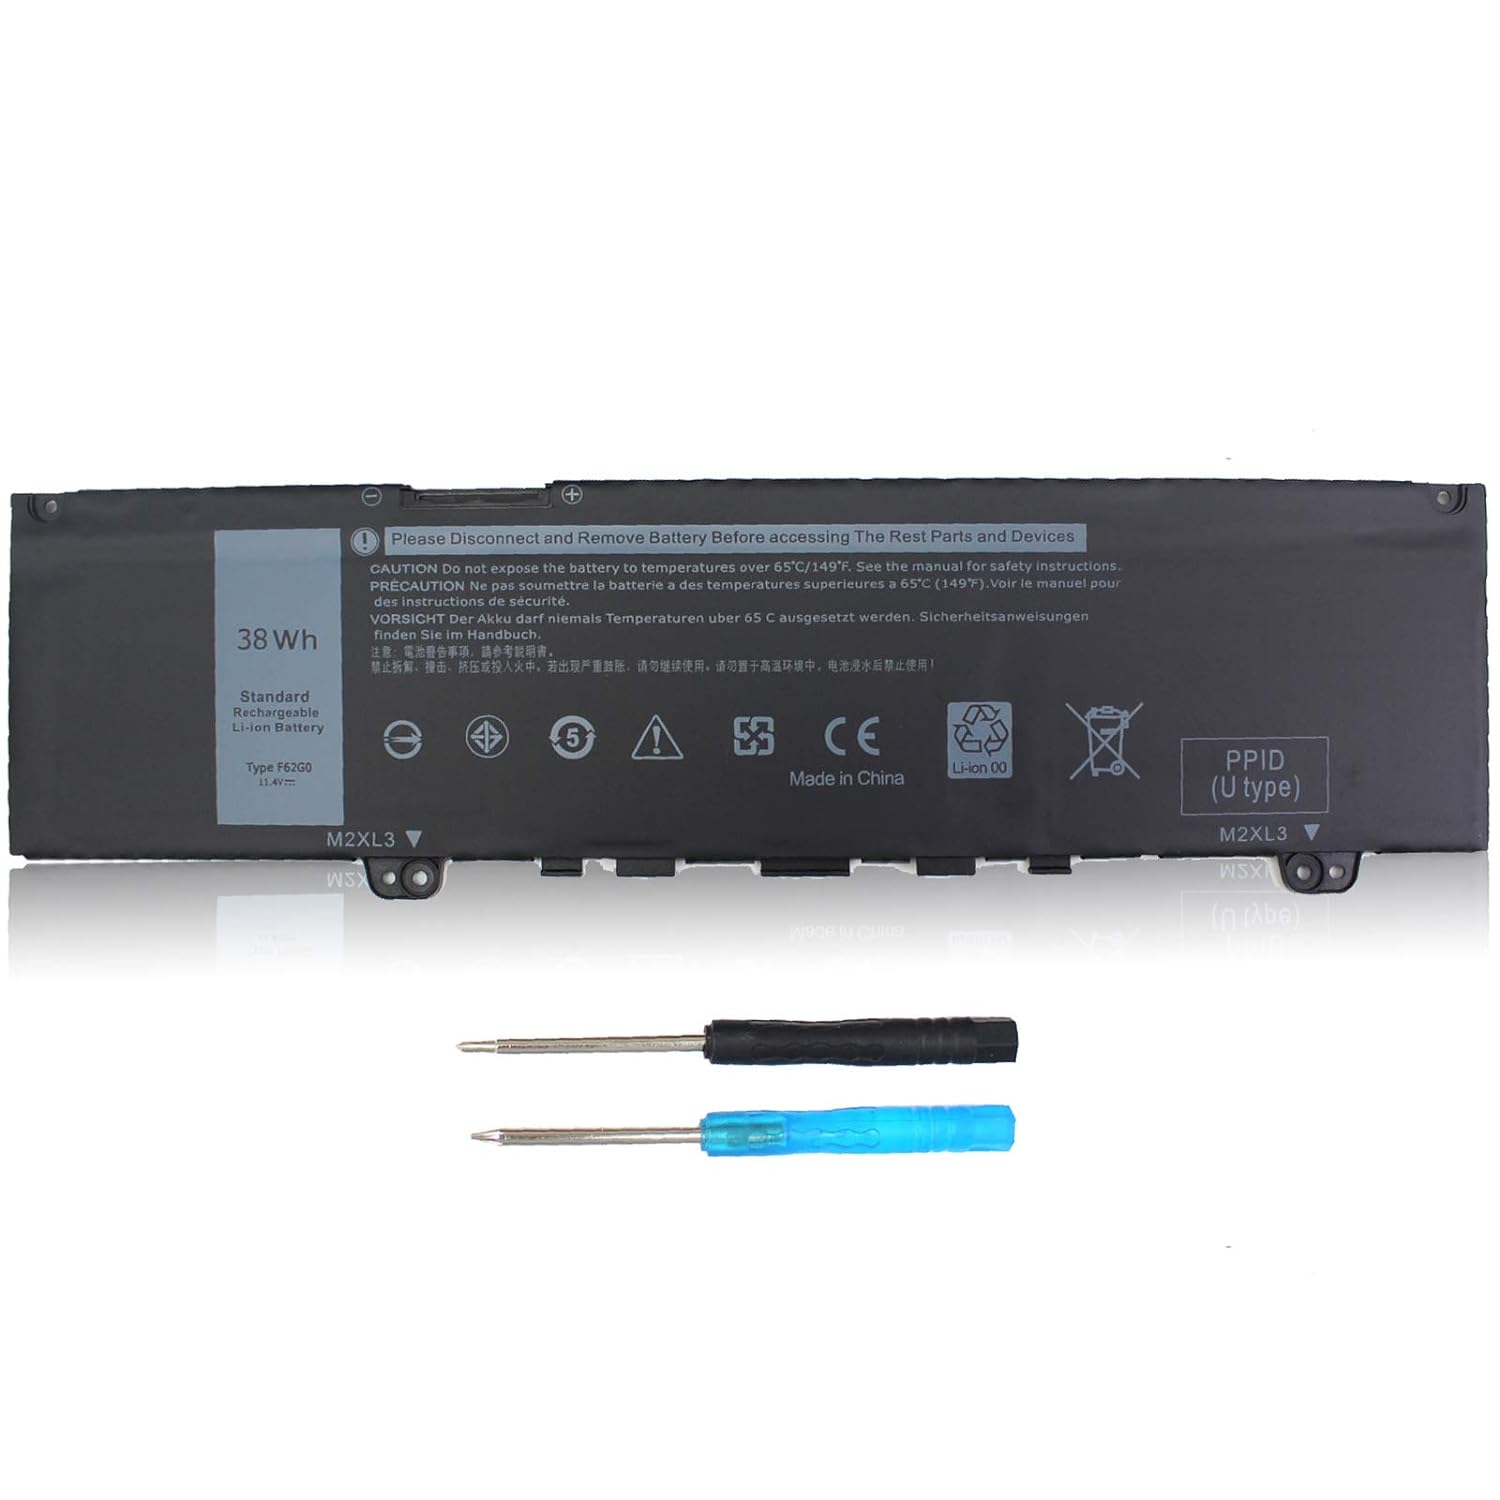 thinkstar Laptop Battery Replacement For Dell Inspiron 13 7373 I7373 7370 7380 5370 7386 P83G P83G001 P83G002 P87G P87G001 Vostro 13 53…